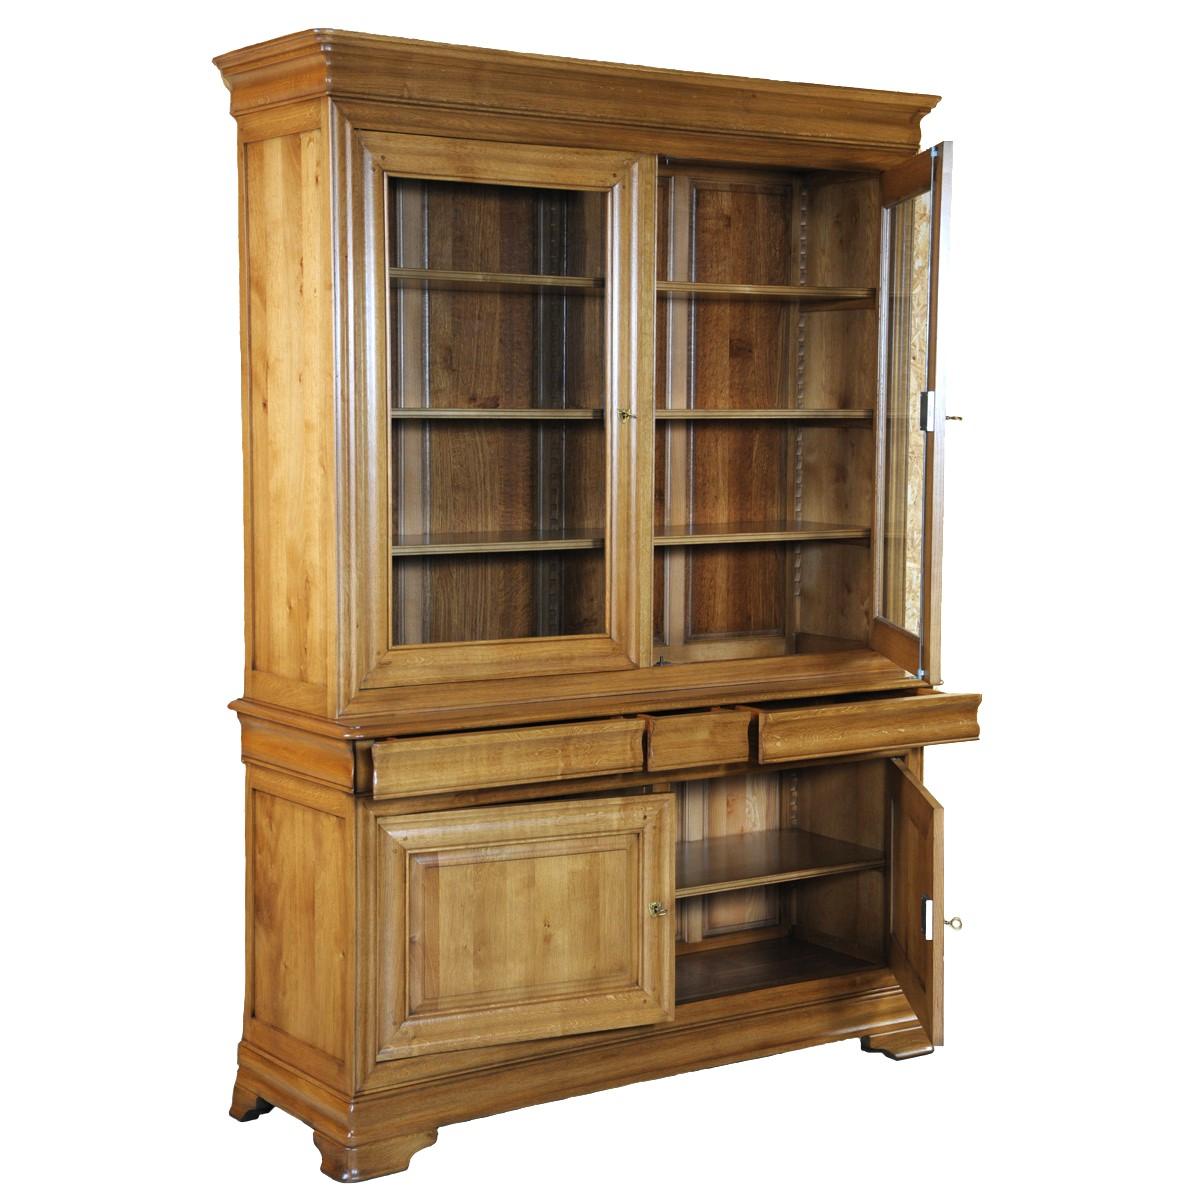 This bookcase is a hand made reproduction of a bookcase from the Louis-Philppe periode in France in the mid 19th century.
It is caracterized by its curved moldings, hand-curved feet and rounded smooth design.
This model features  doors and 2 bodies